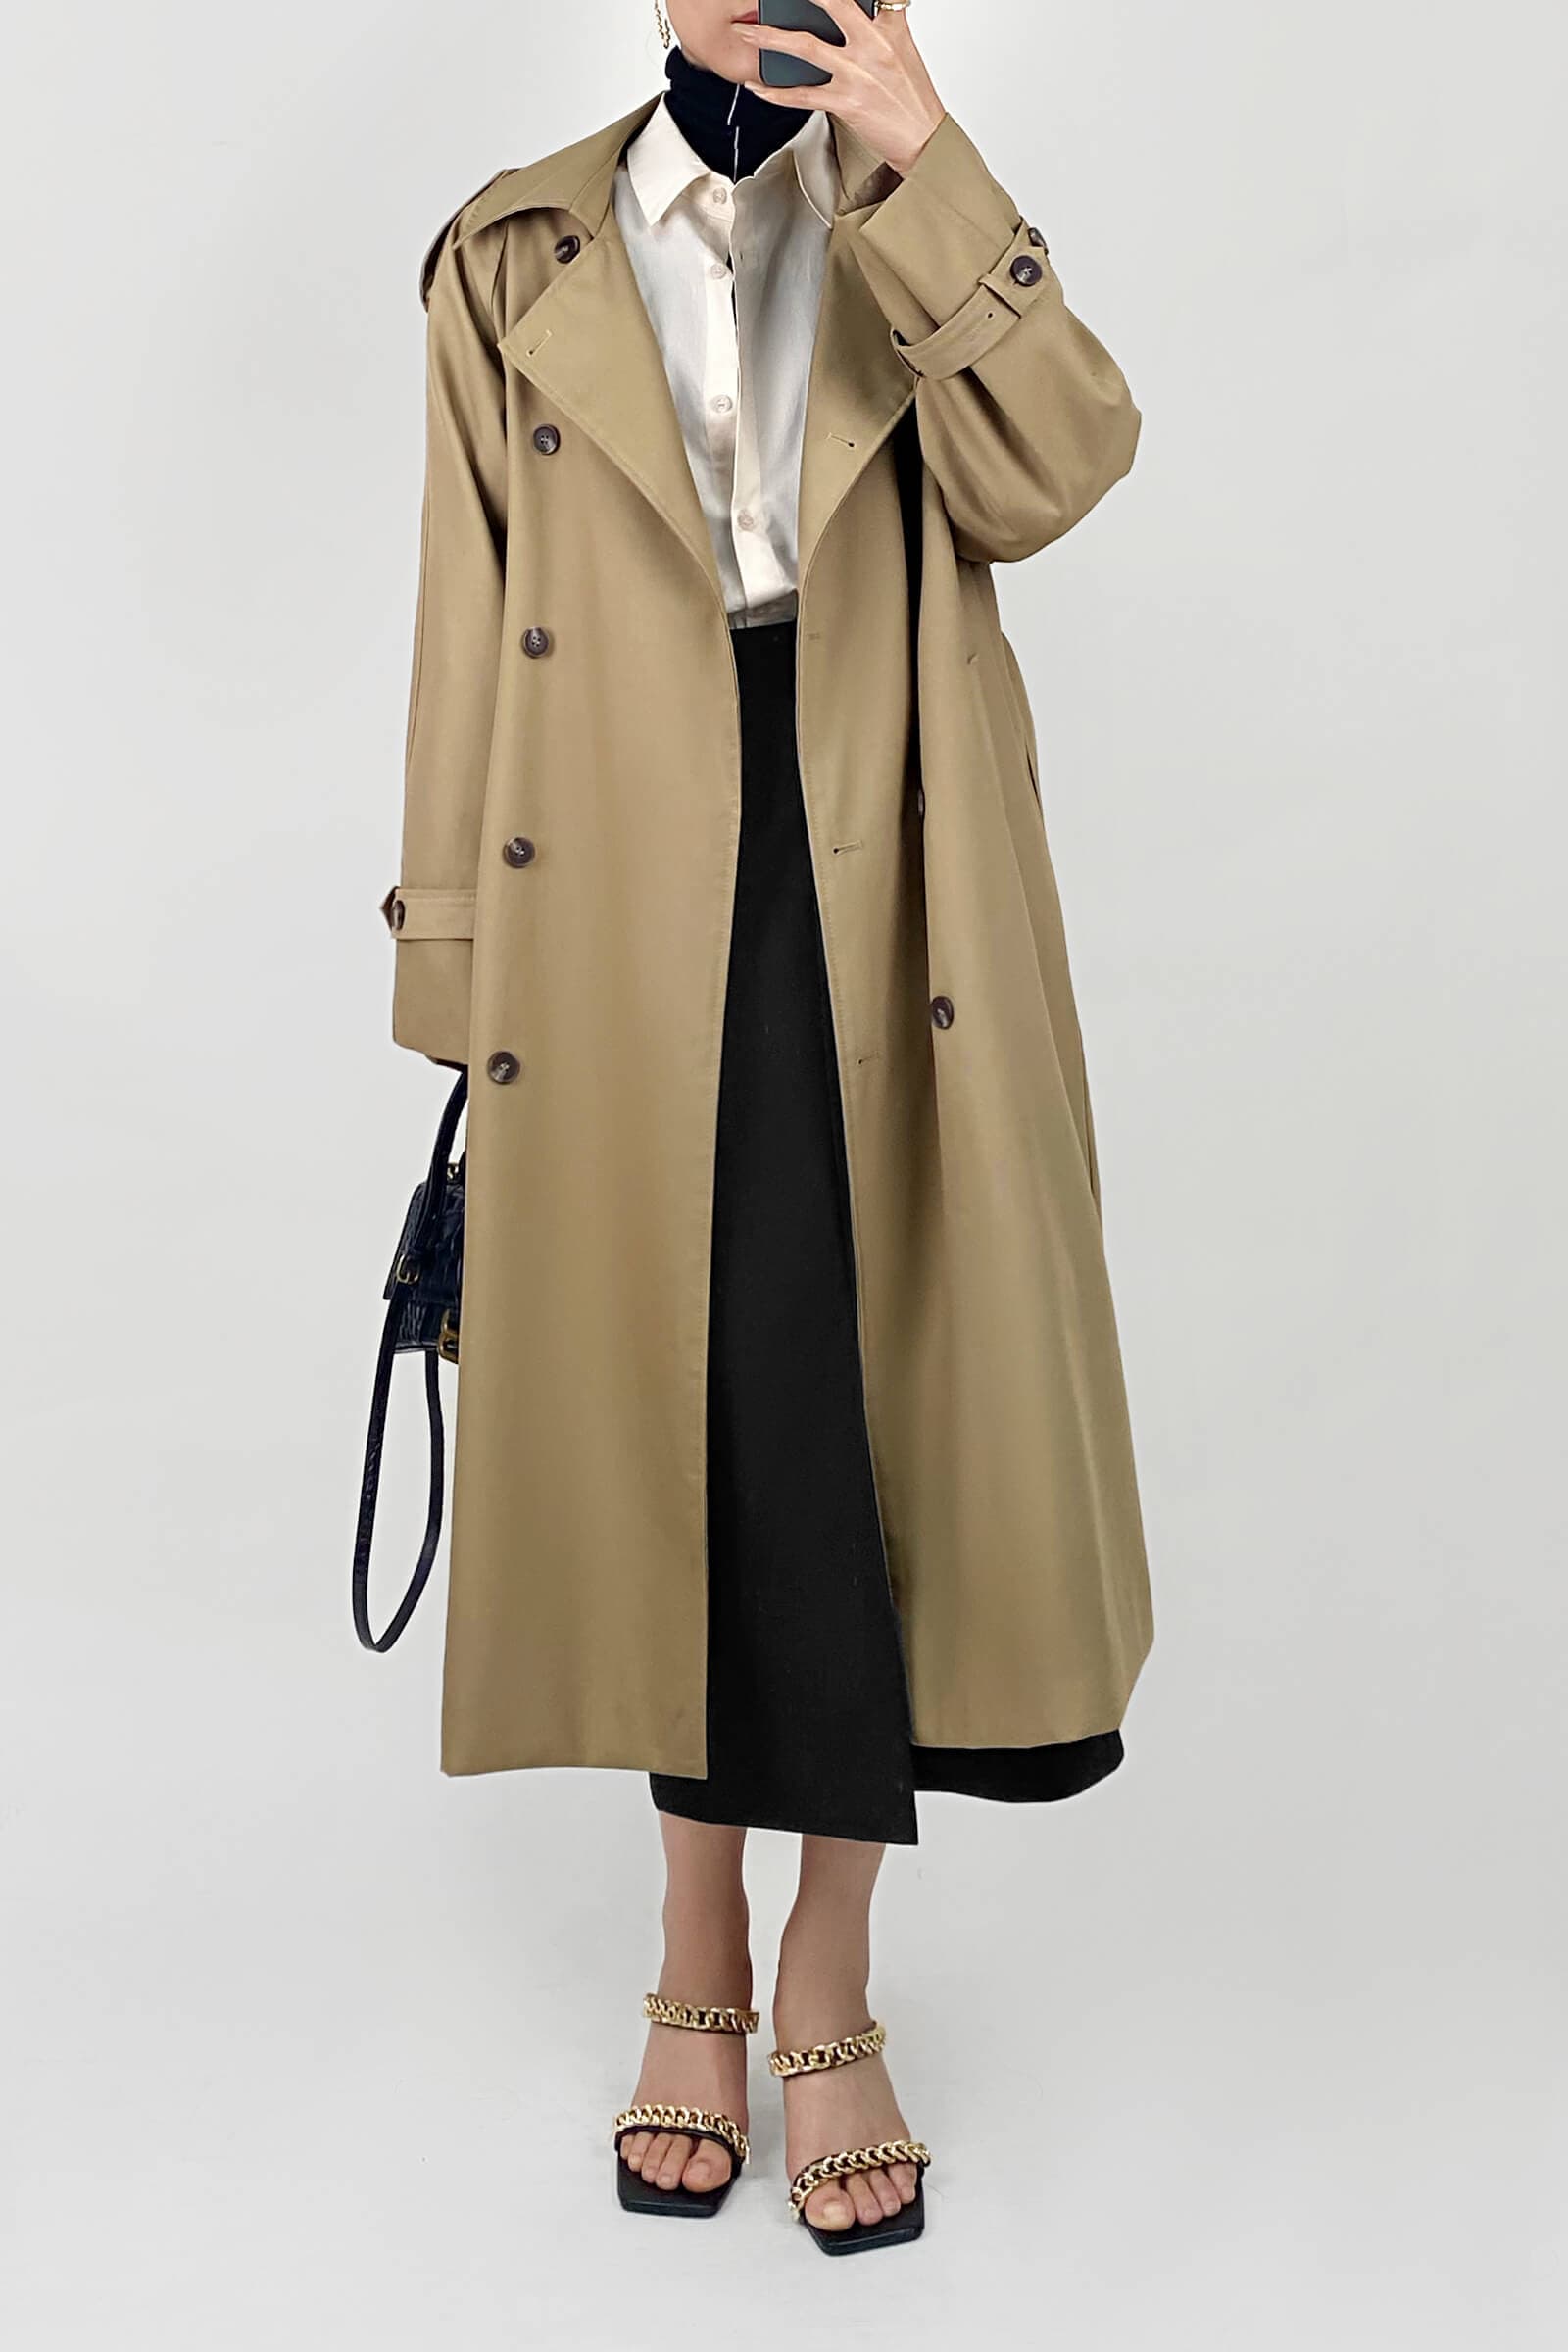 Tan Double-Breasted Belted Longline Trench Coat  Women's Coats